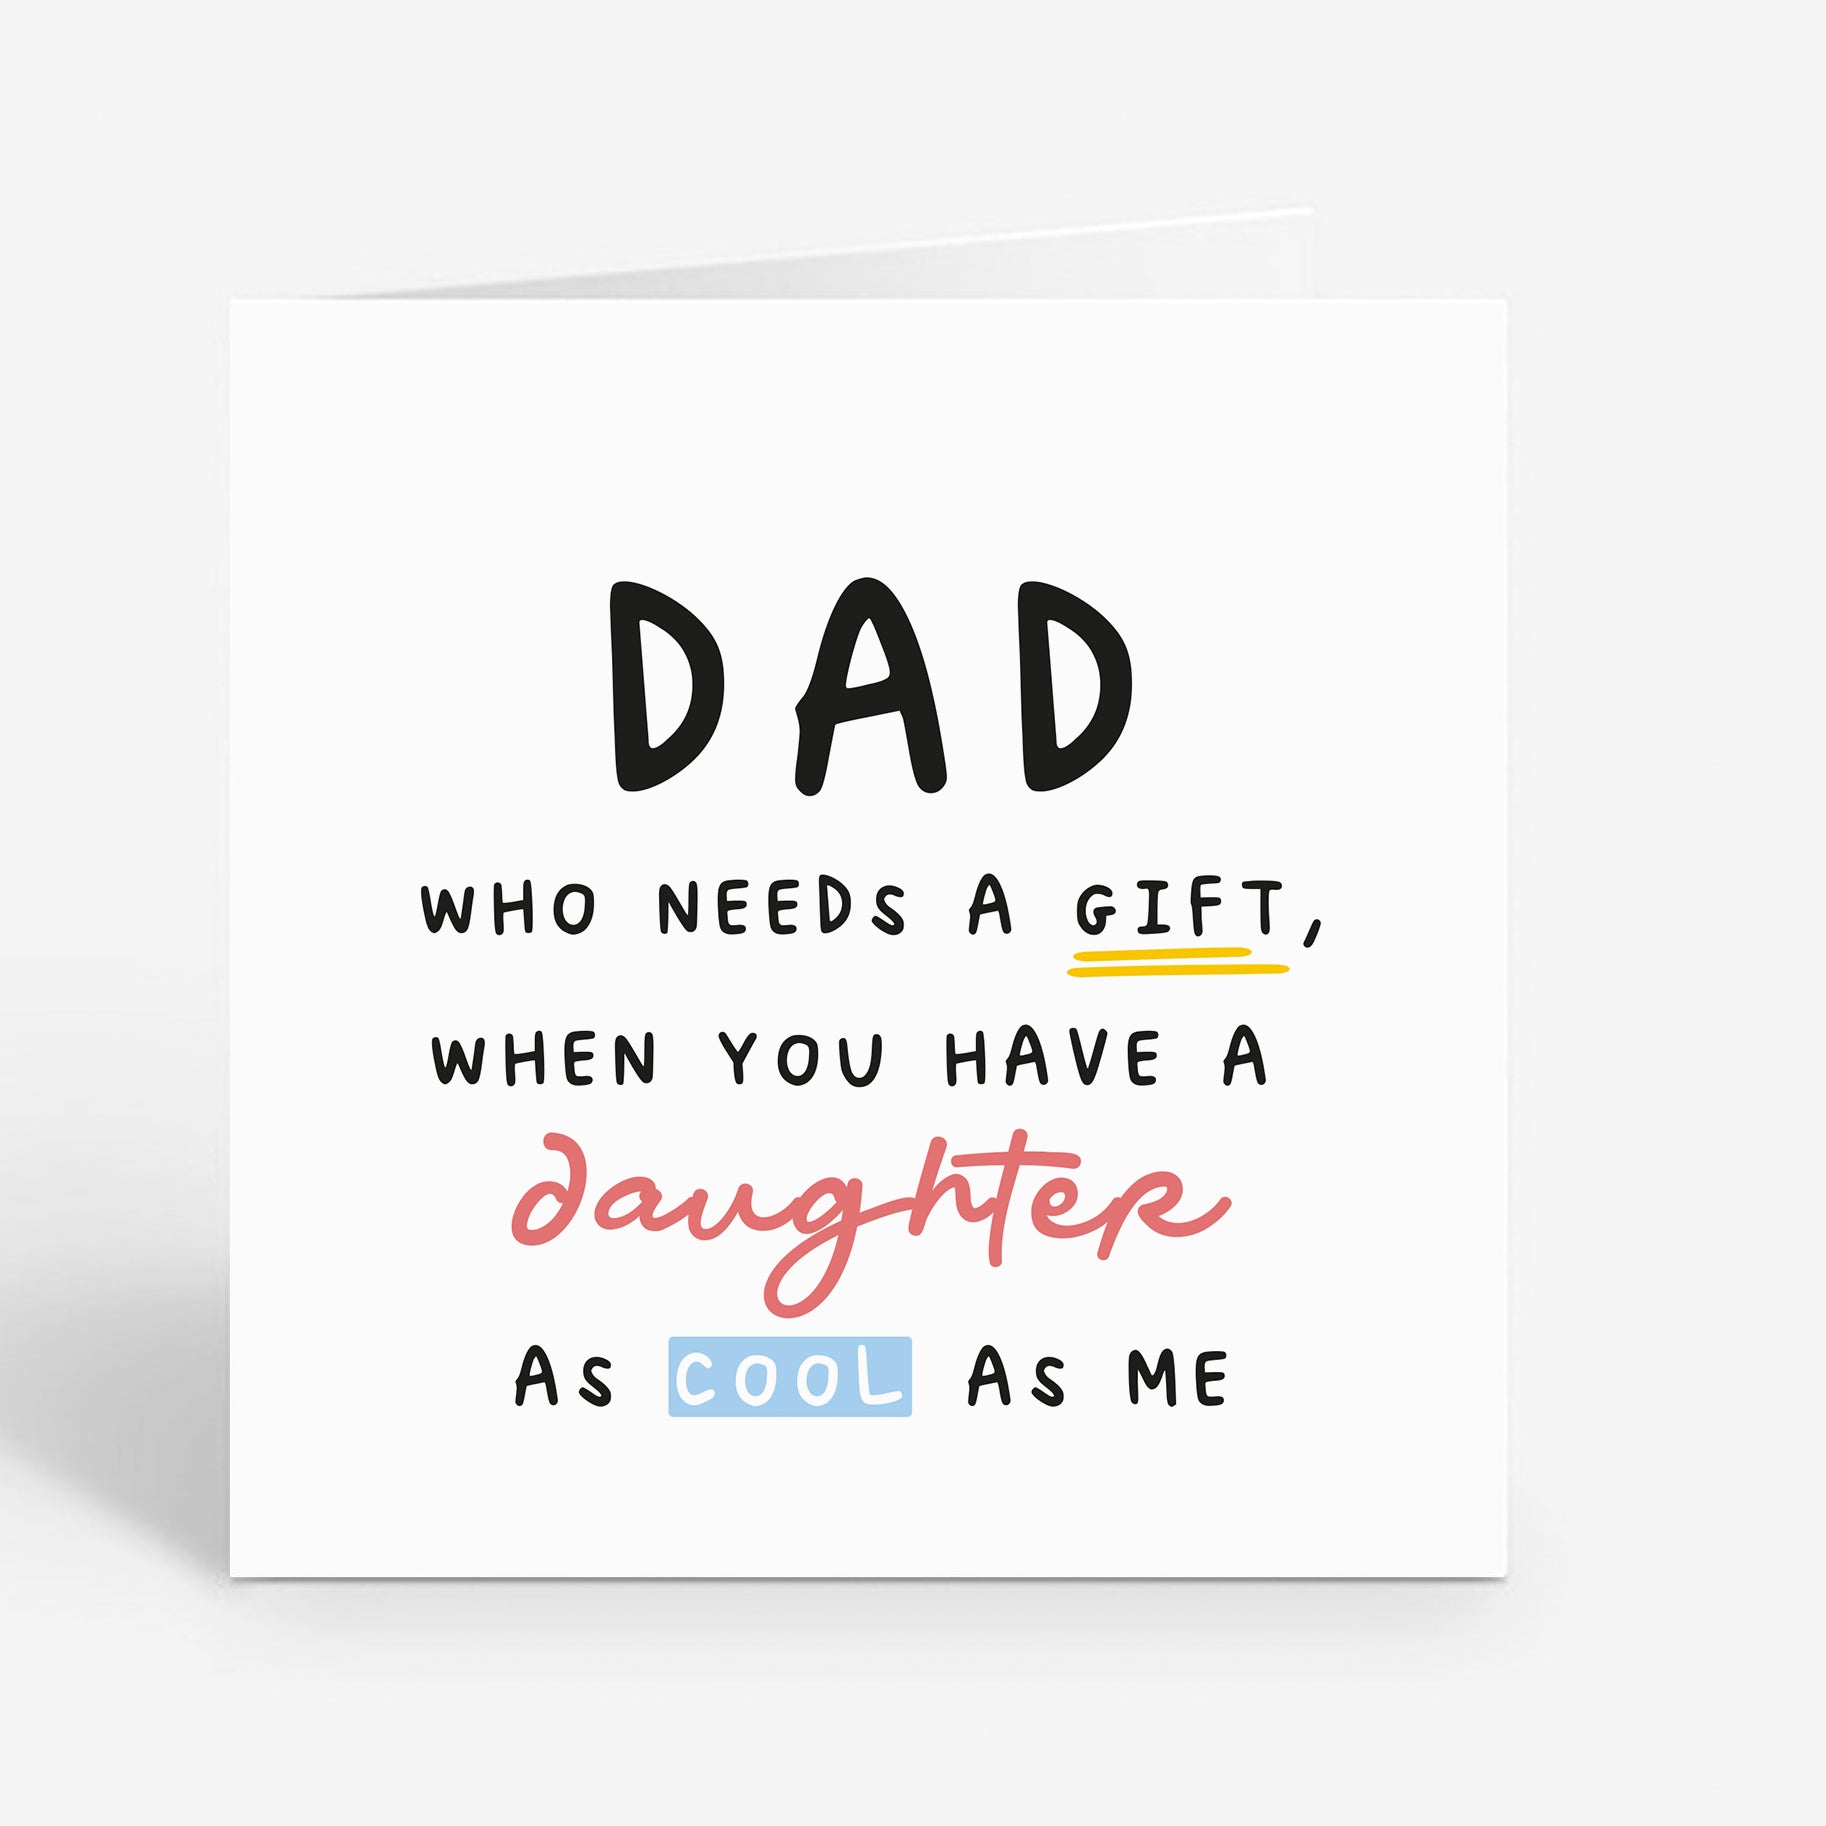 Daughter as cool as me - Birthday Card for Dad